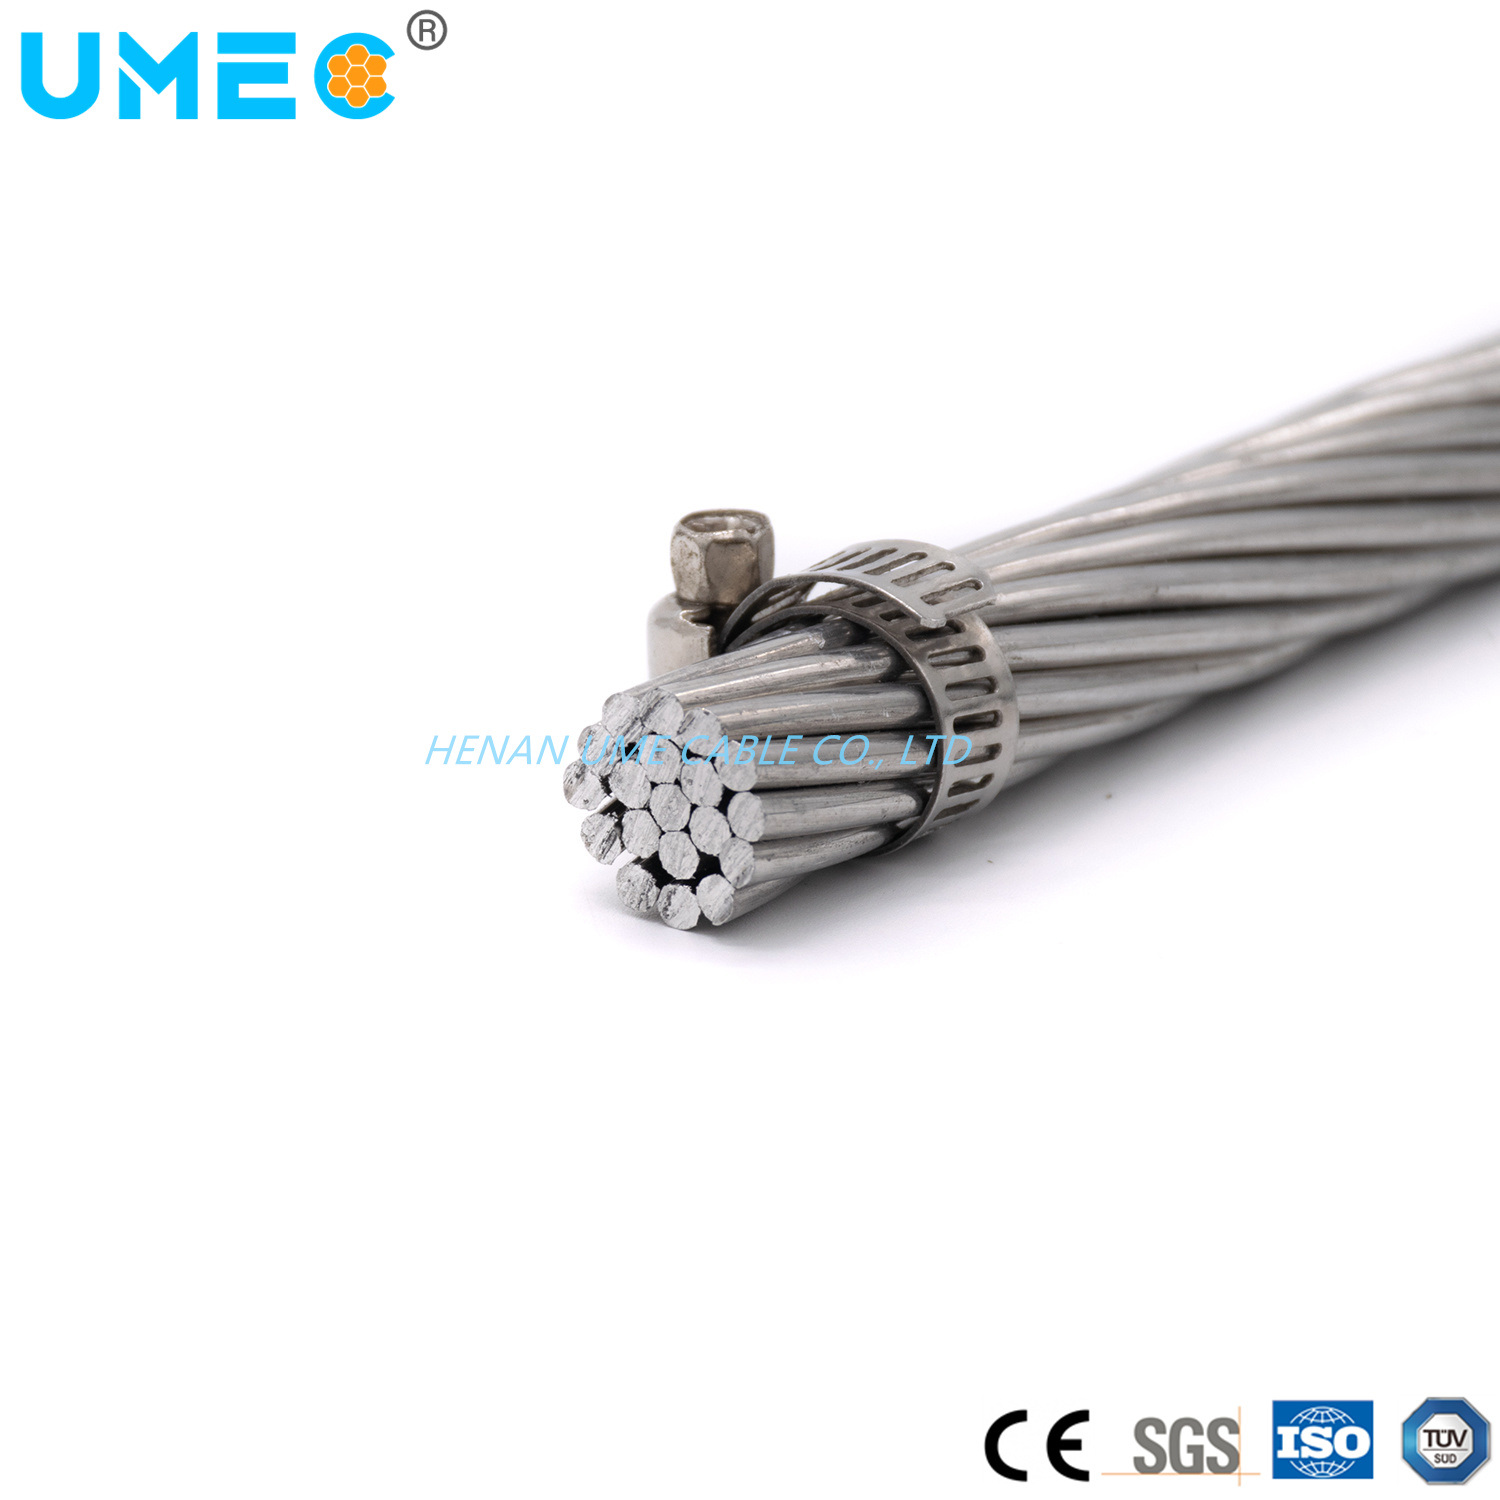 Electrical Overhead Line Conductor AAC Bare Aluminum Wires Cables 2/0 3/0 4/0 Electric Bare Aluminum Cable